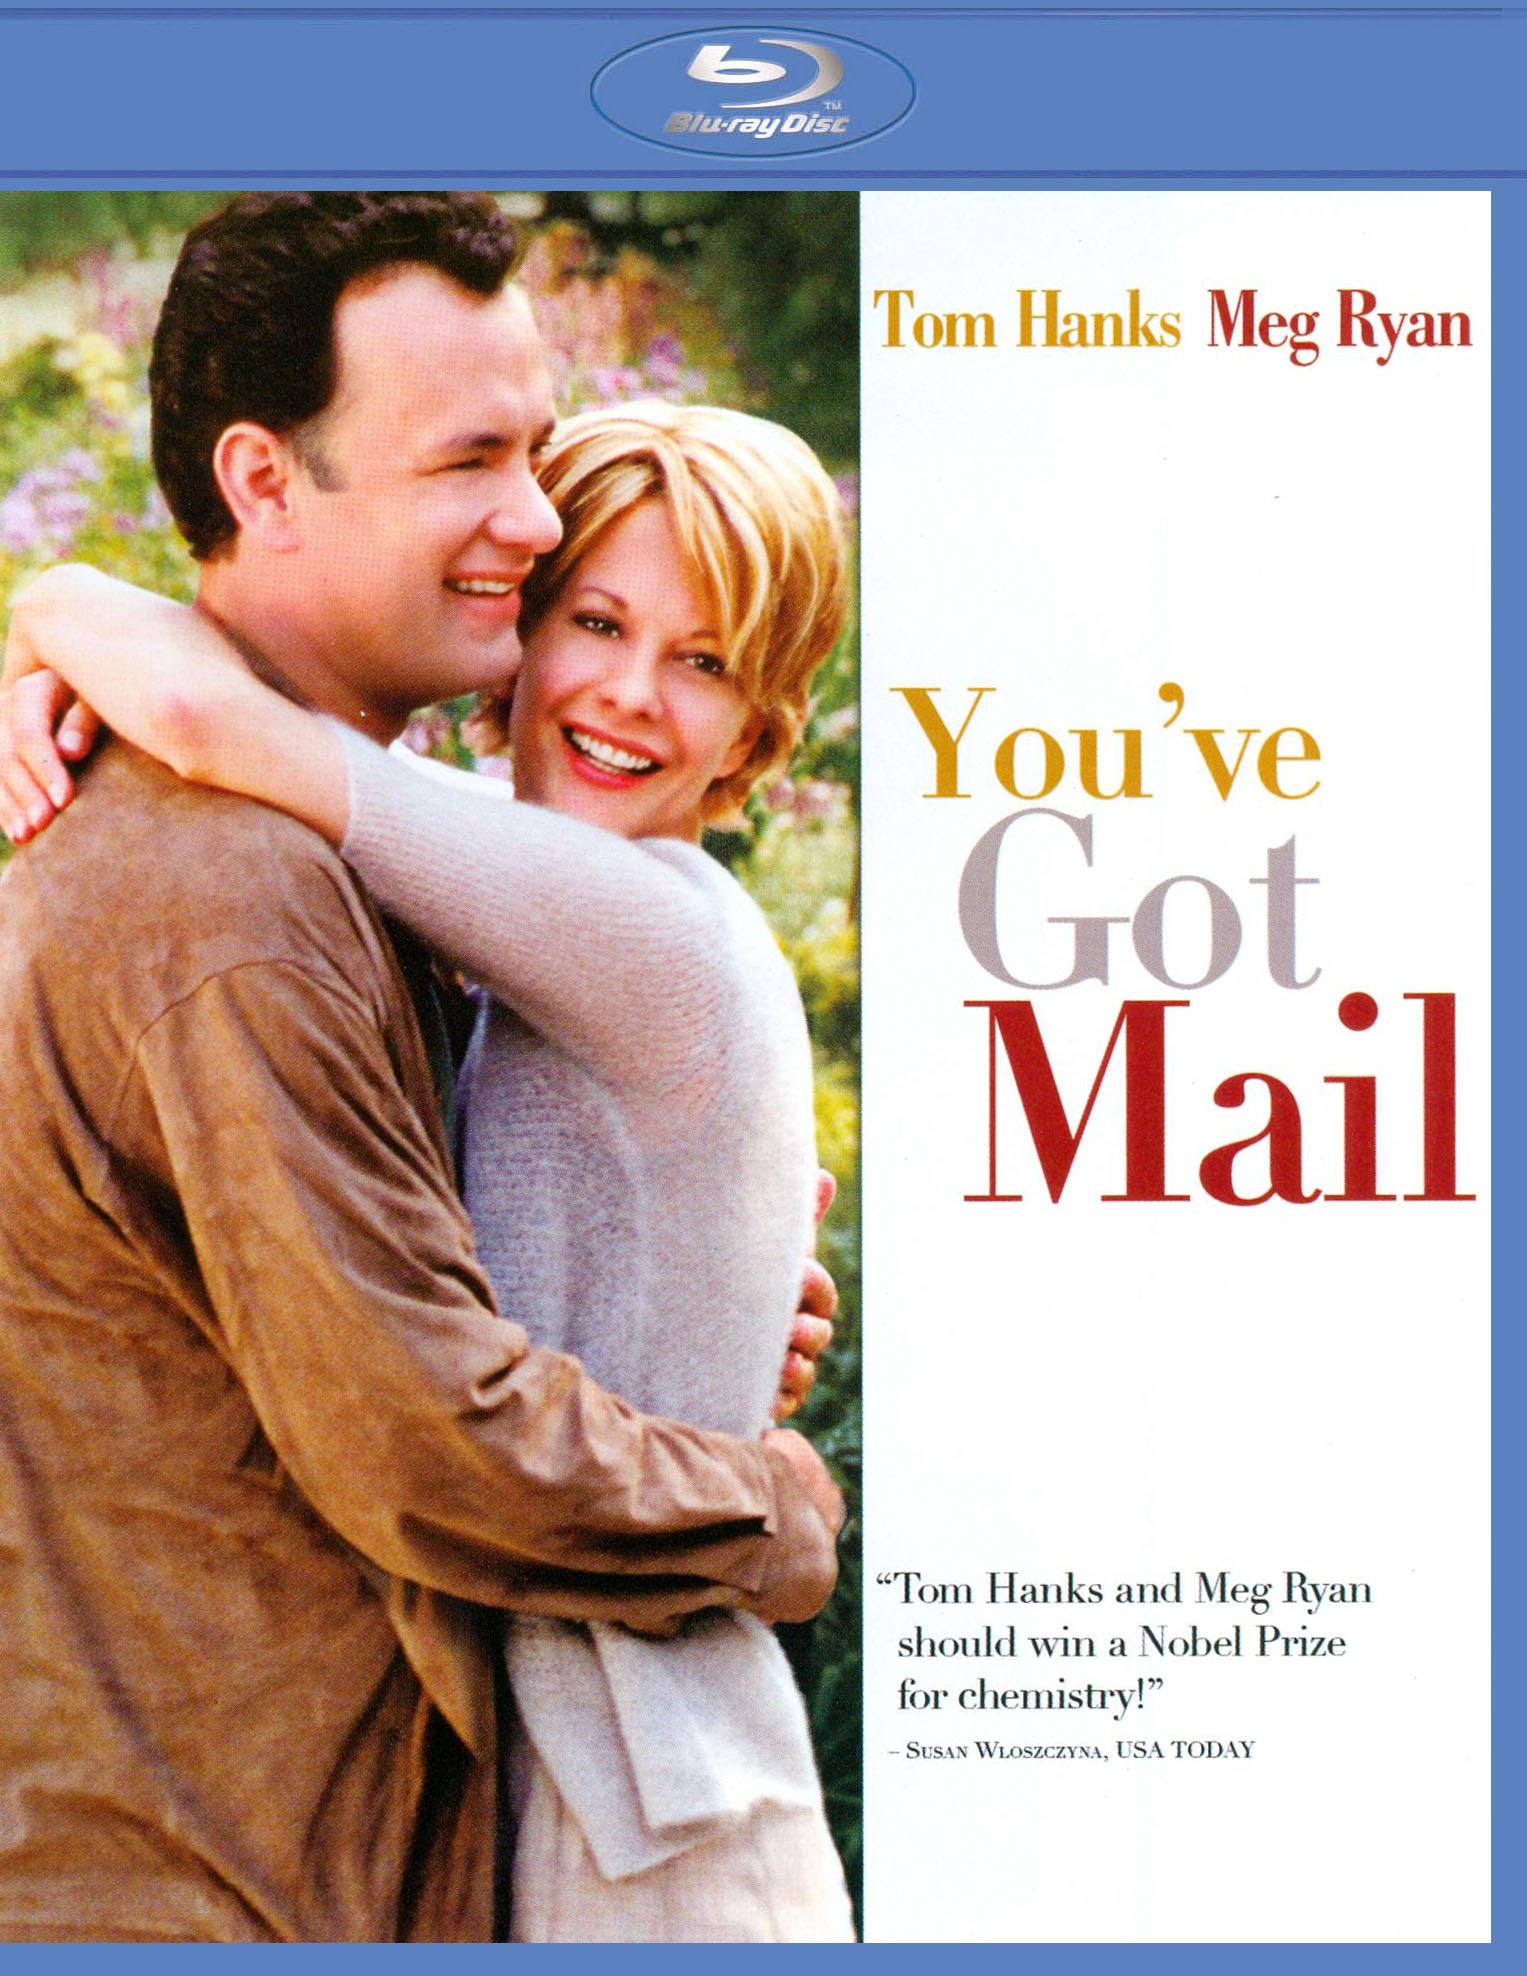 You've Got Mail - Plugged In